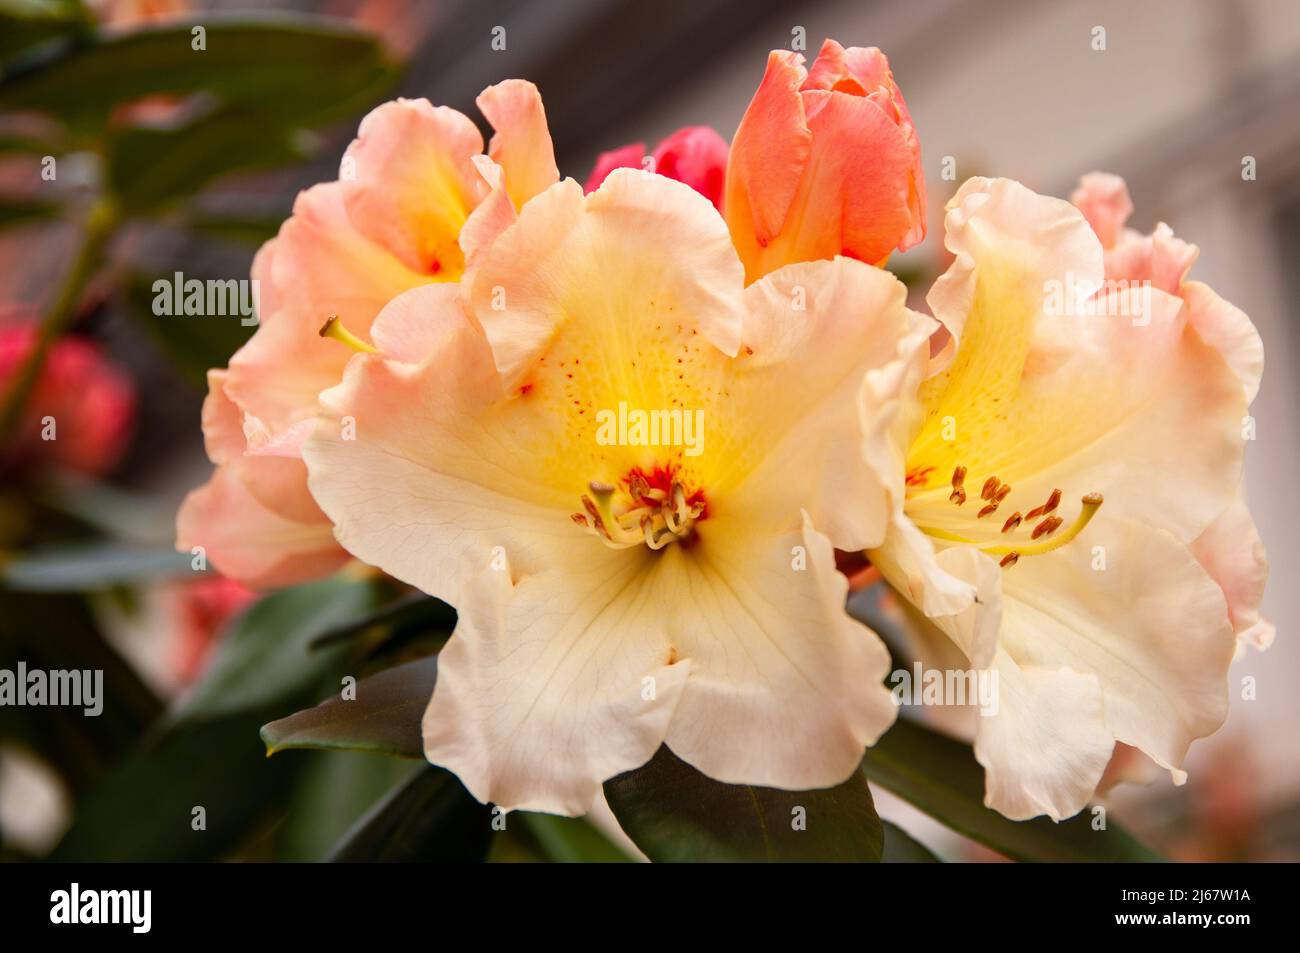 Rhododendron white flowers with pink and yellow dots in bloom, blooming evergreen shrub, blooms in spring. Stock Photo